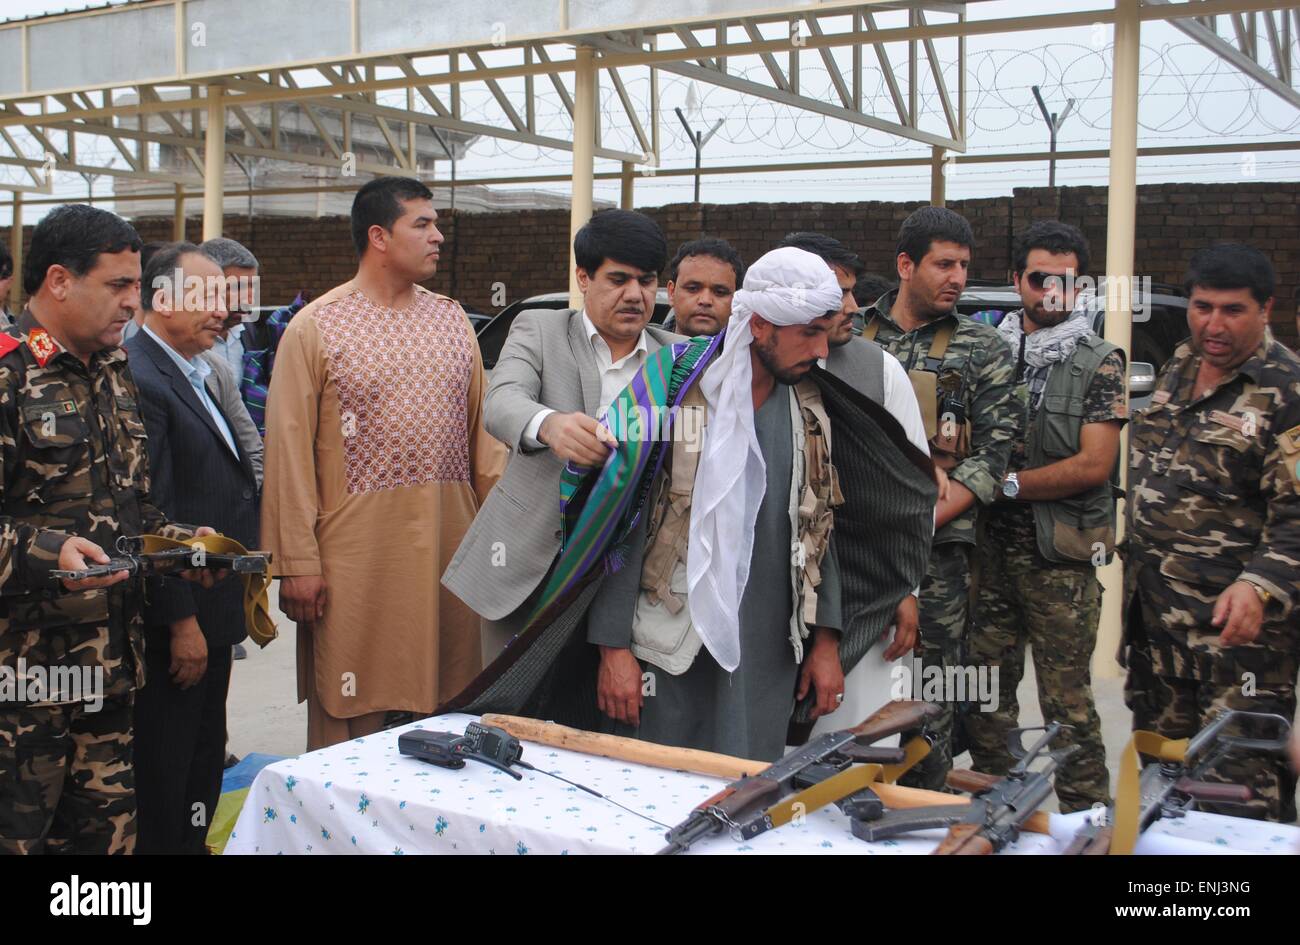 Kunduz, Afghanistan. 6th May, 2015. Taliban fighters attend a surrender ceremony held in Kunduz province, northern Afghanistan, May 6, 2015. A total of 190 Taliban militants have been killed over the past 13 days of heavy fighting in Kunduz province with Kunduz city as its capital, 250 km north of Kabul, while 23 others laid down arms and surrendered on Wednesday, provincial governor Mohammad Omar Safi said. © Ajmal/Xinhua/Alamy Live News Stock Photo